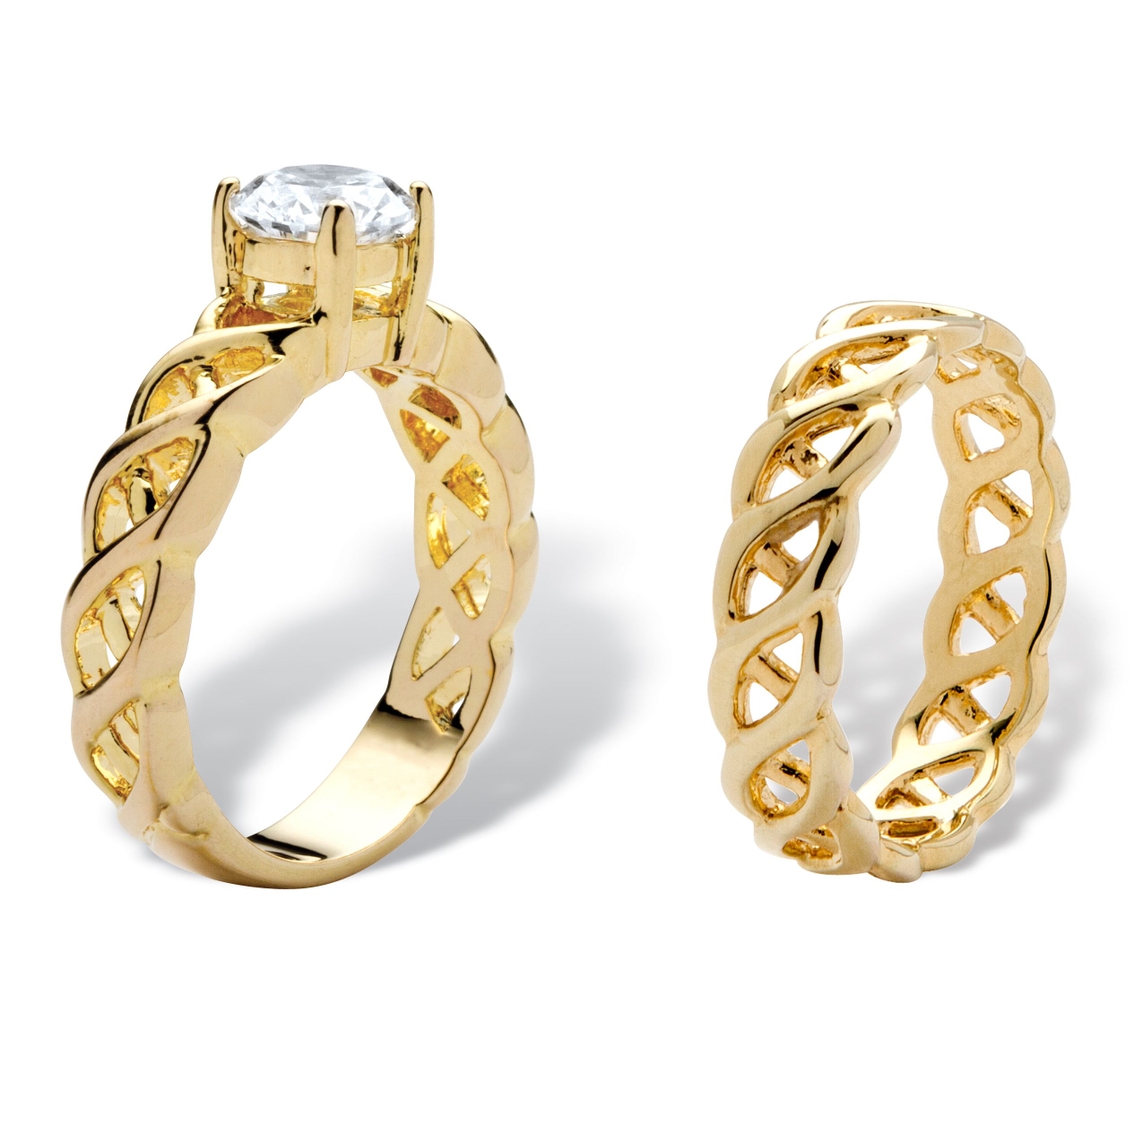 PalmBeach 1.08 Cttw. Yellow Gold-Plated Round Cubic Zirconia Wedding Ring Set - Image 2 of 5